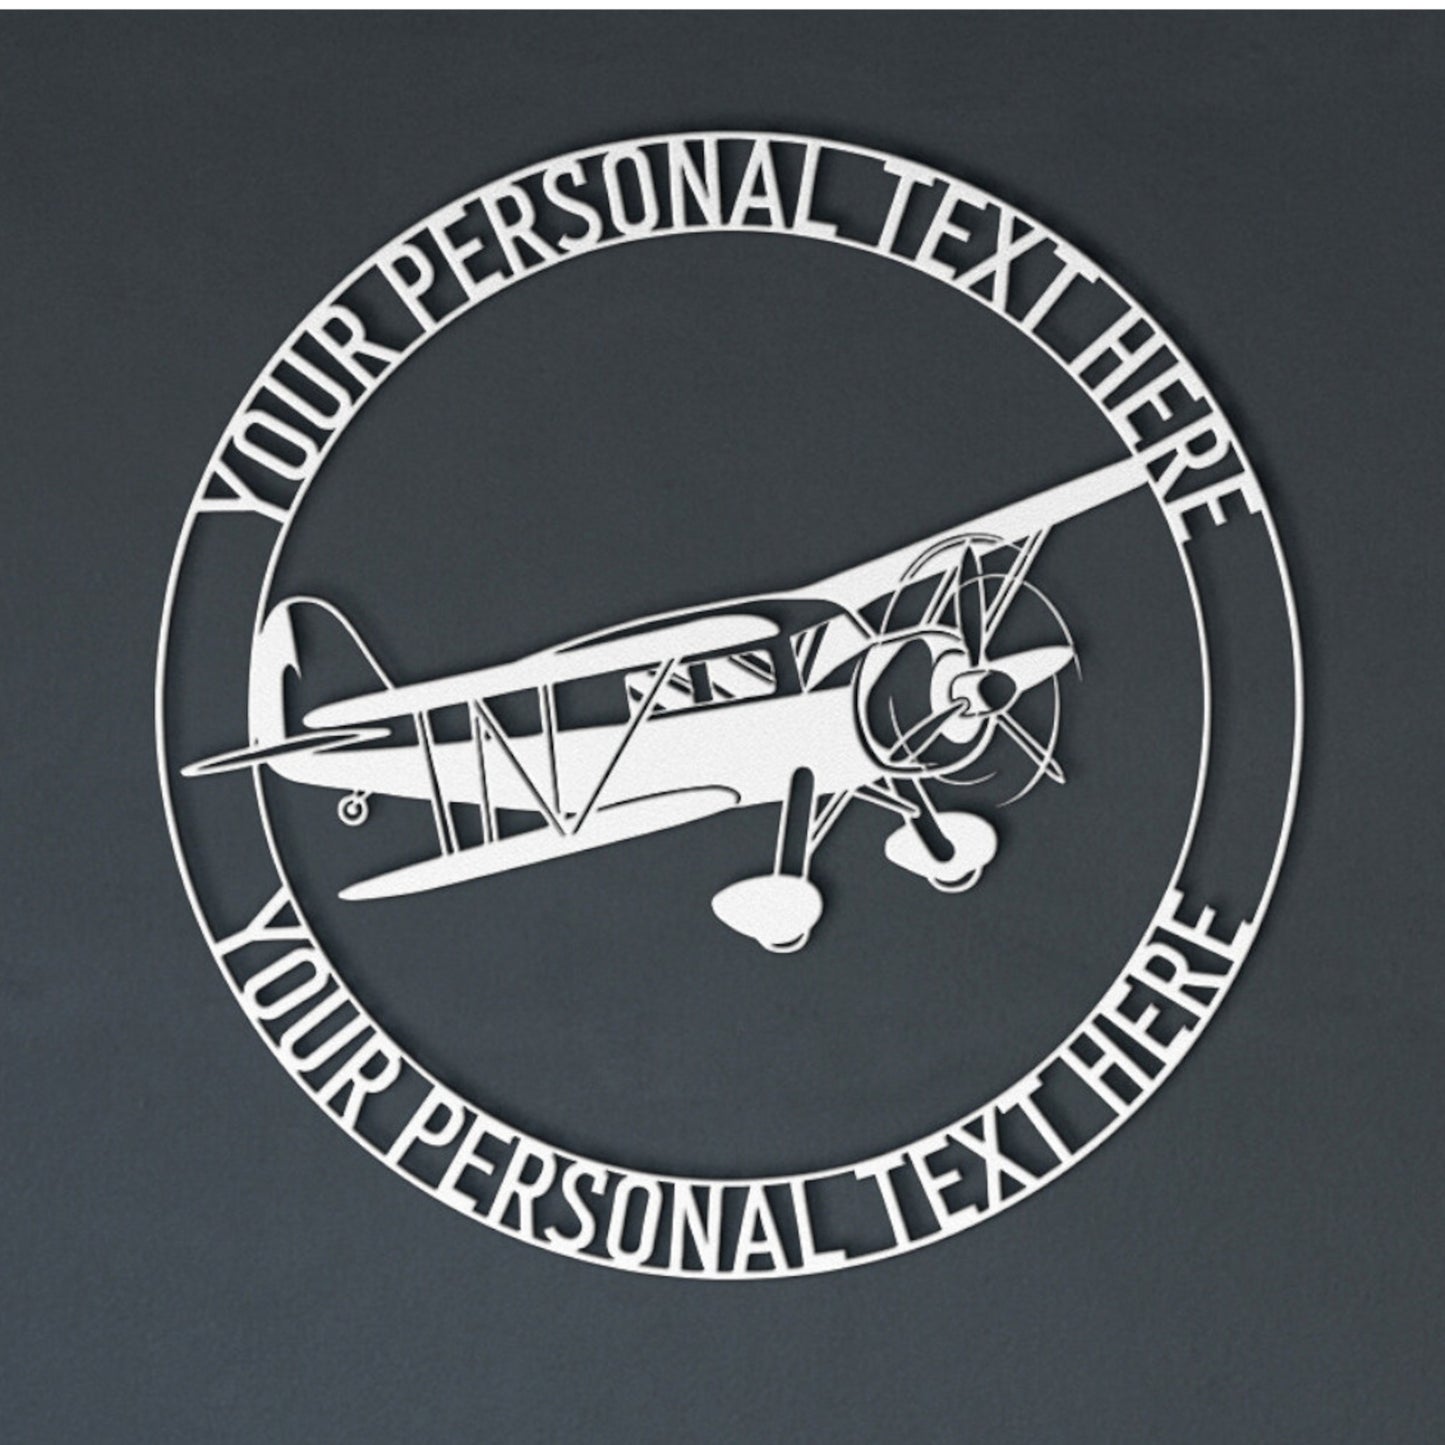 Biplane Personalized Text Metal Sign